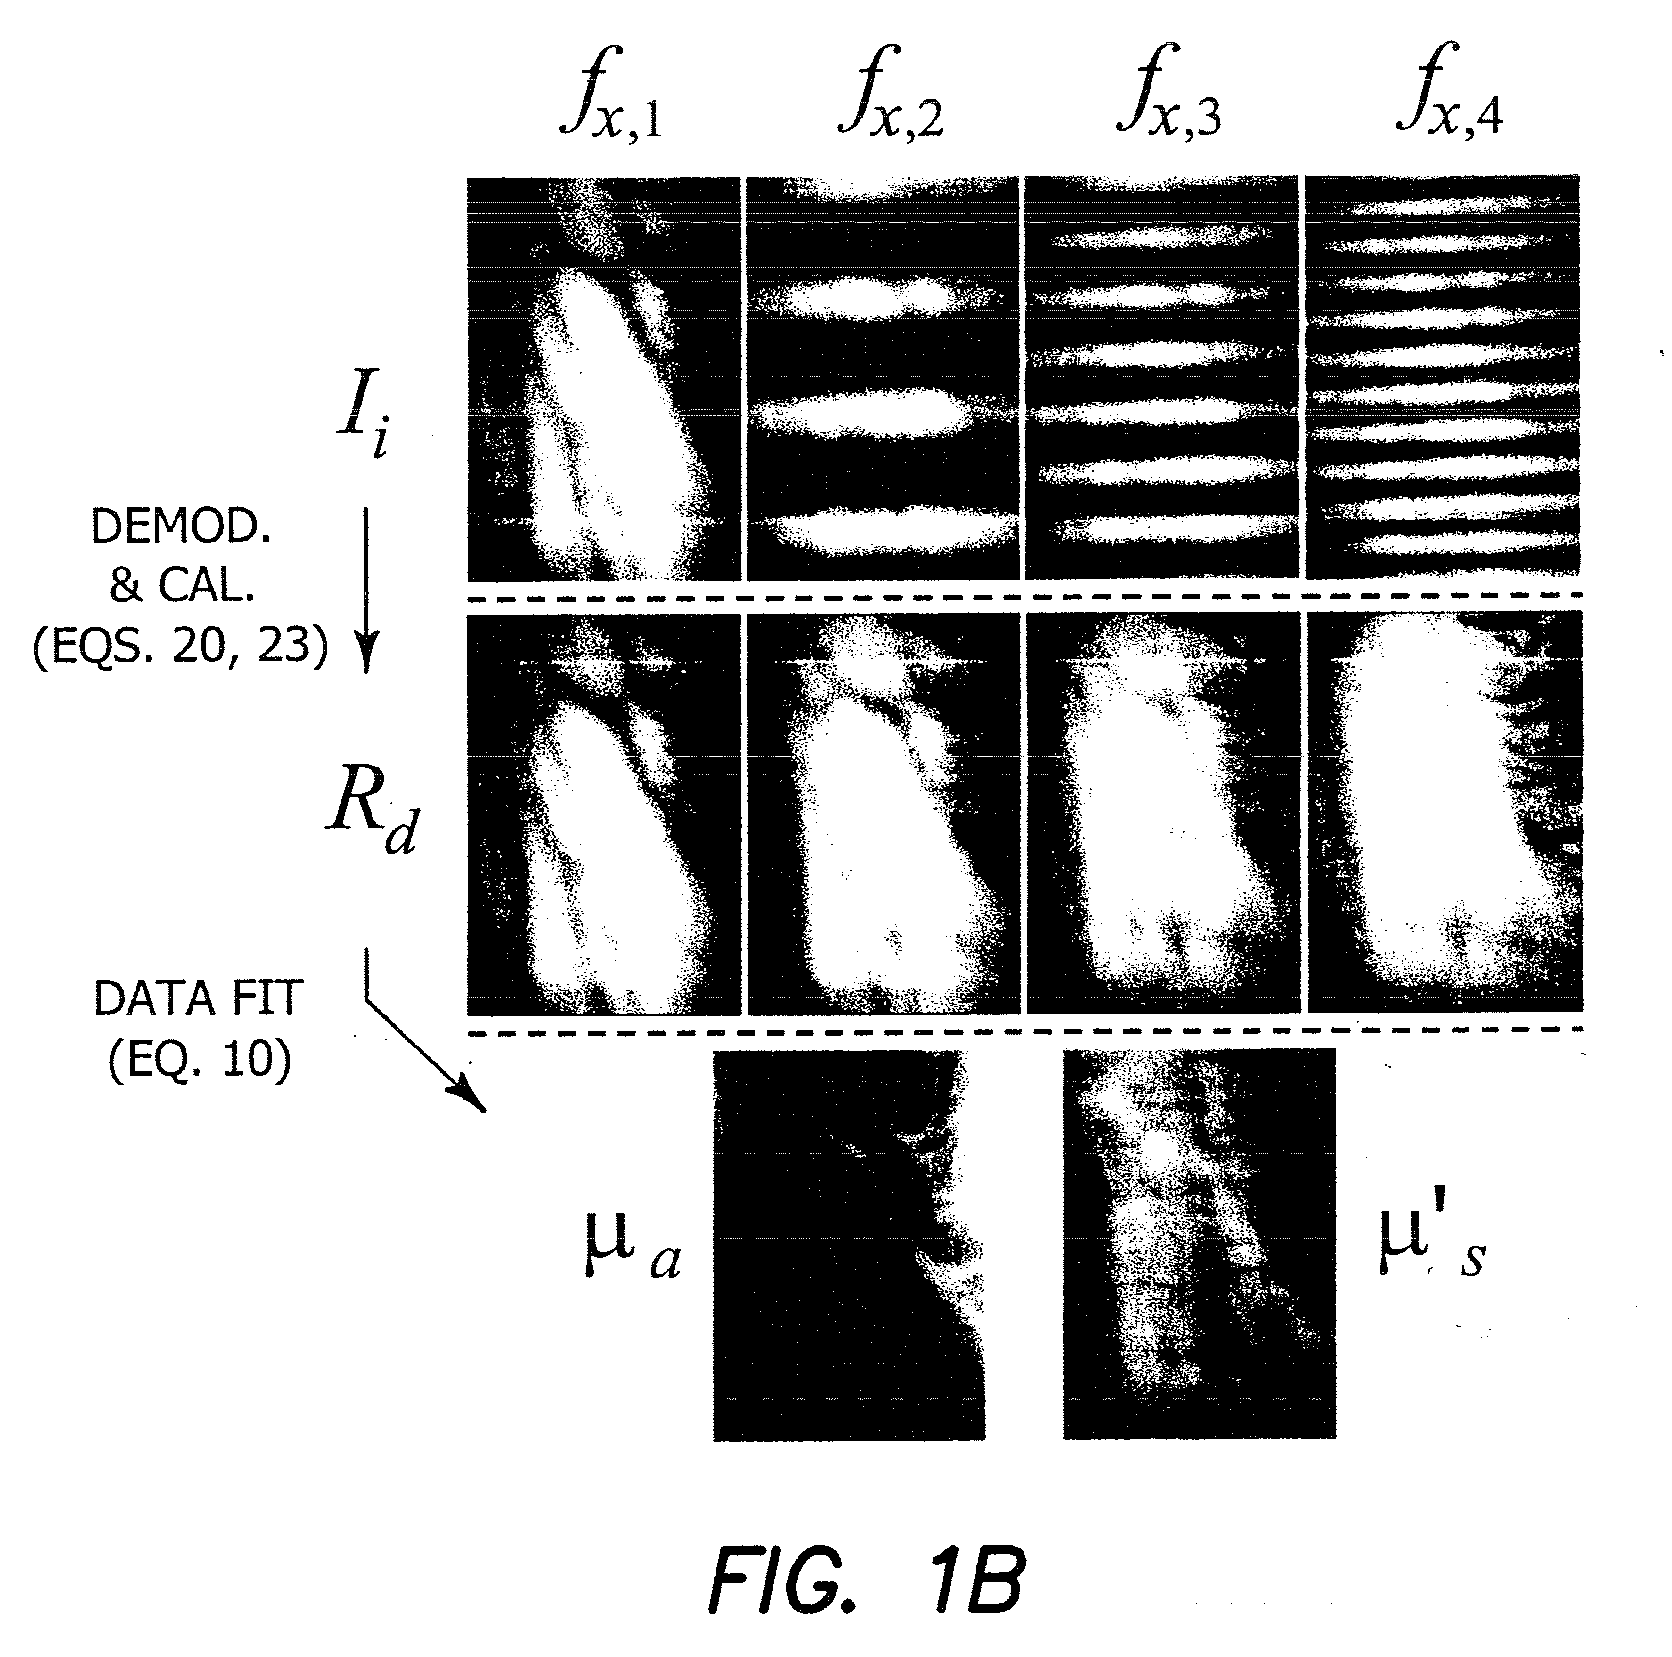 APPARATUS AND METHOD FOR WIDEFIELD FUNCTIONAL IMAGING (WiFI) USING INTEGRATED STRUCTURED ILLUMINATION AND LASER SPECKLE IMAGING